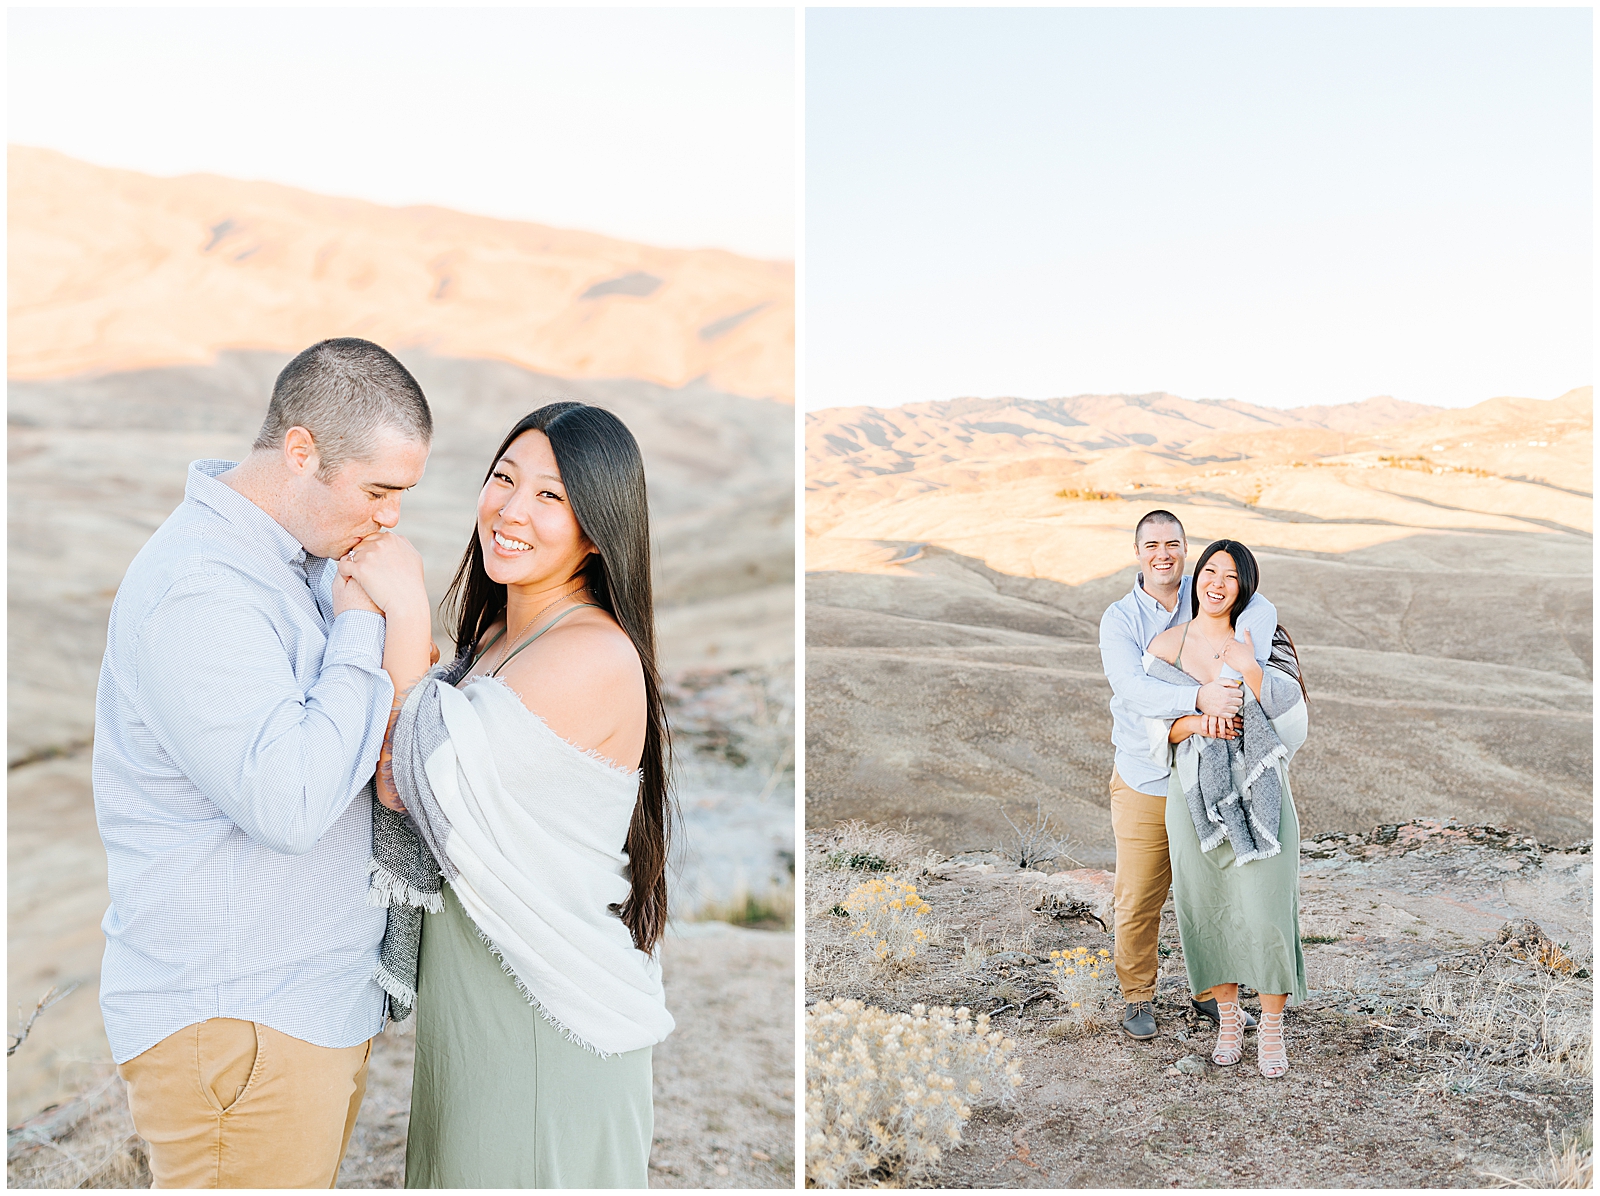 Fall Table Rock Engagement Photos in Boise Idaho